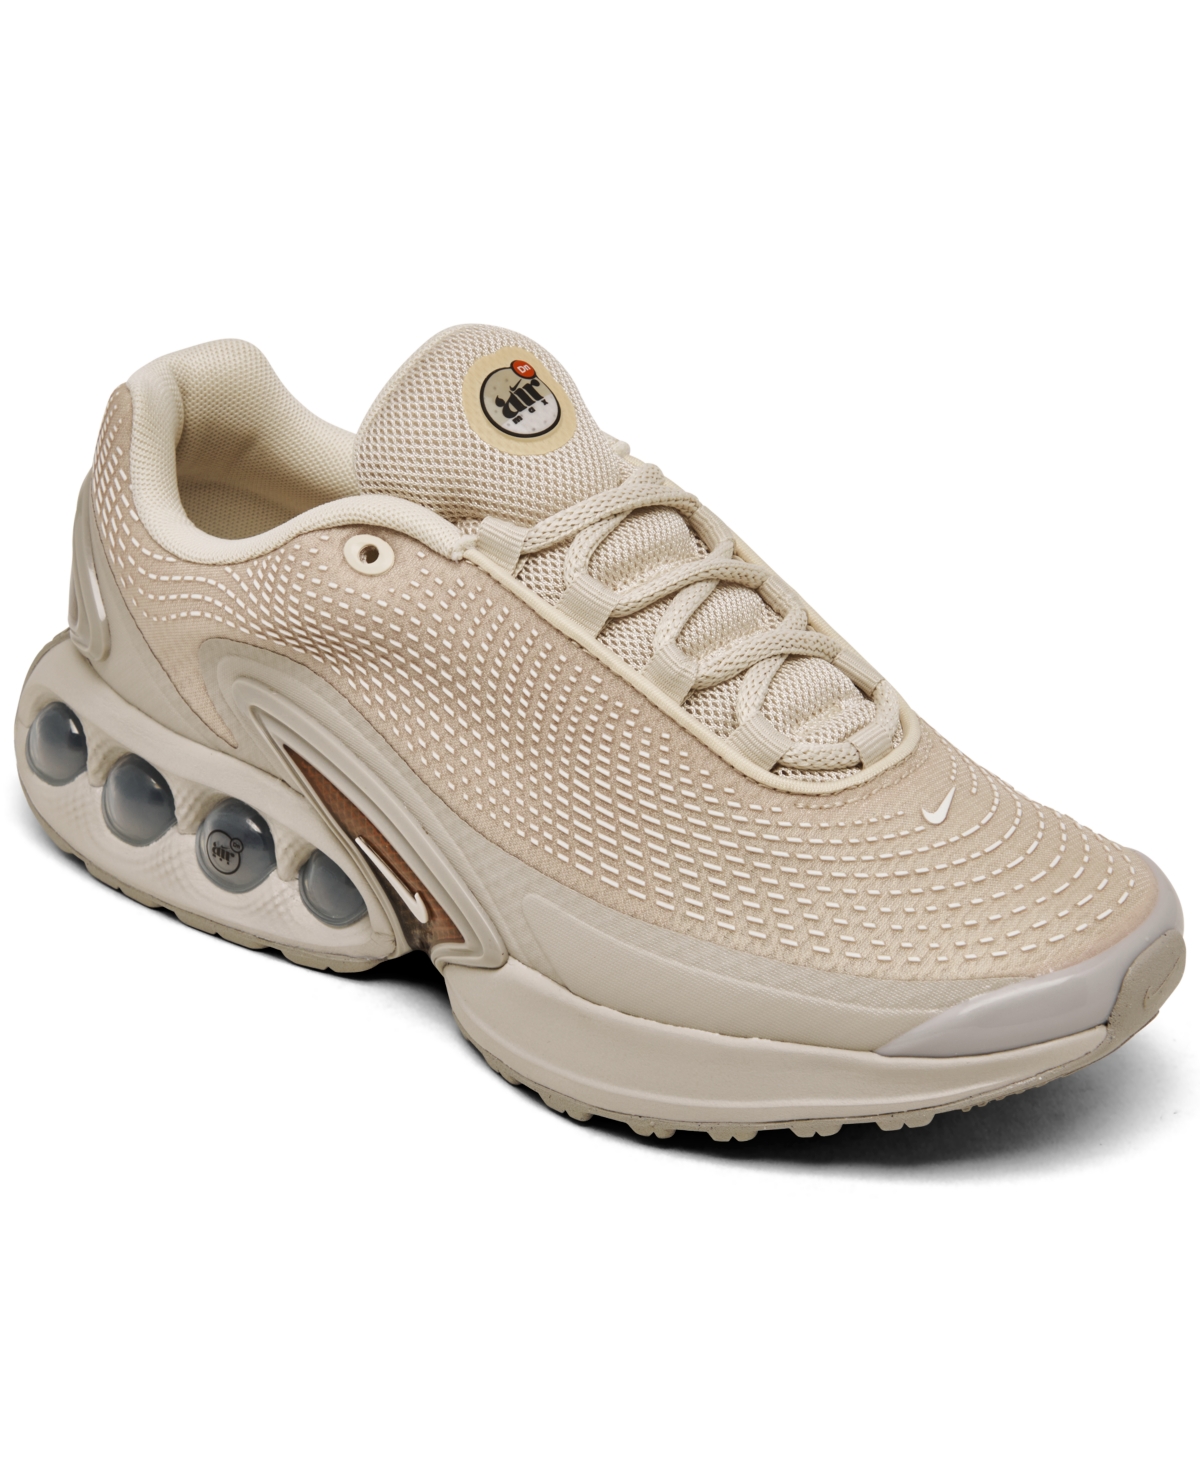 Women's Air Max Dn Casual Sneakers from Finish Line - Light Orewood Brown/Phant